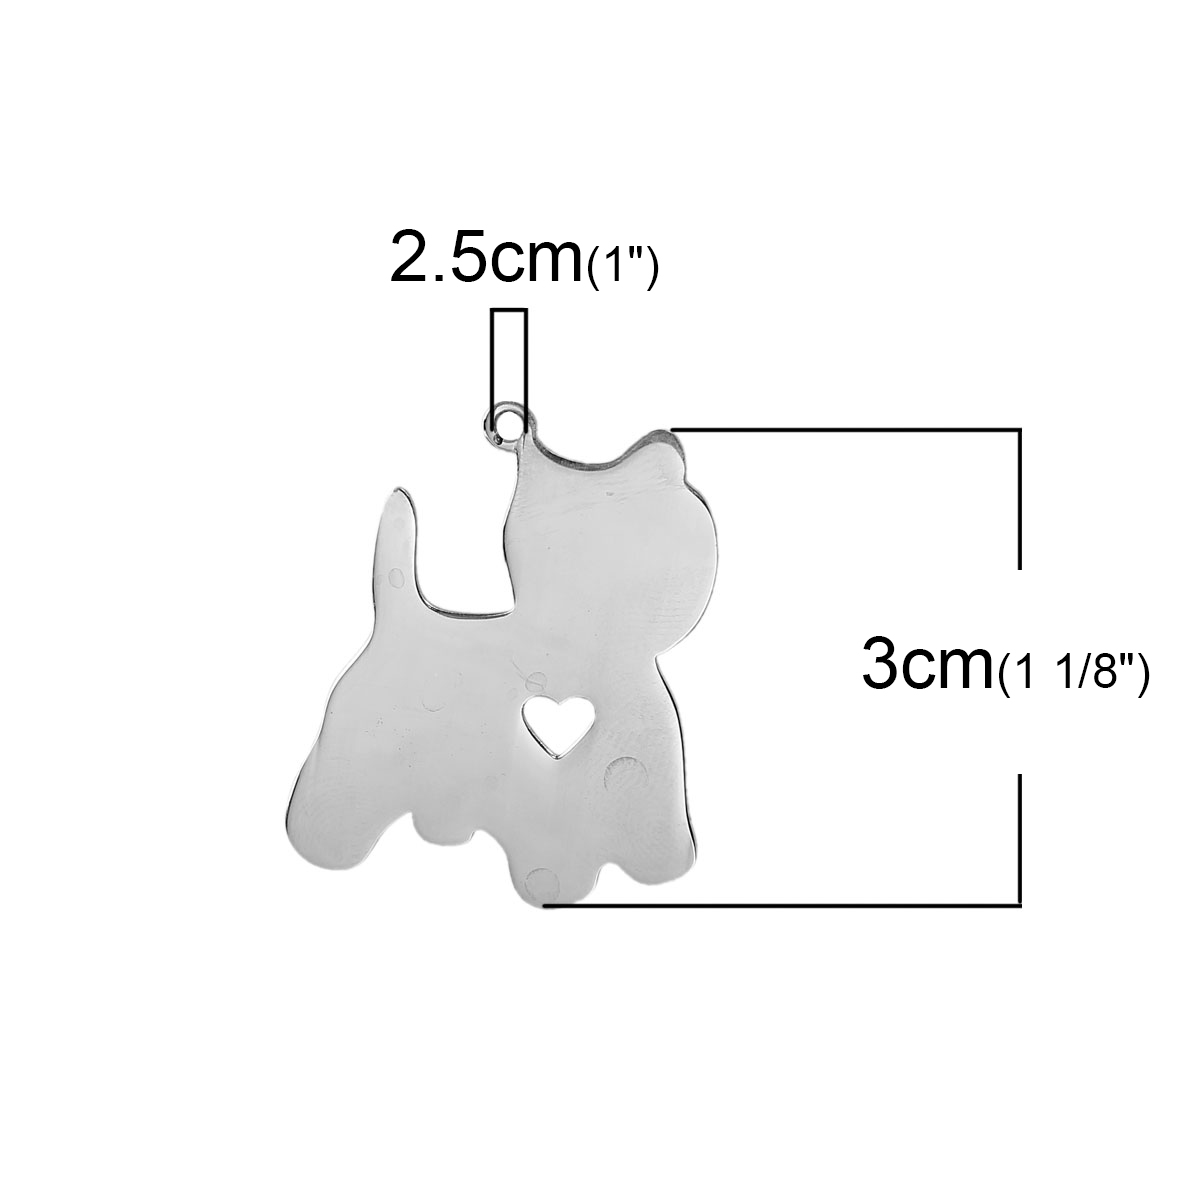 Picture of 1 Piece 304 Stainless Steel Pet Silhouette Blank Stamping Tags Pendants Yorkie Animal Heart Silver Tone Double-sided Polishing 30mm x 25mm